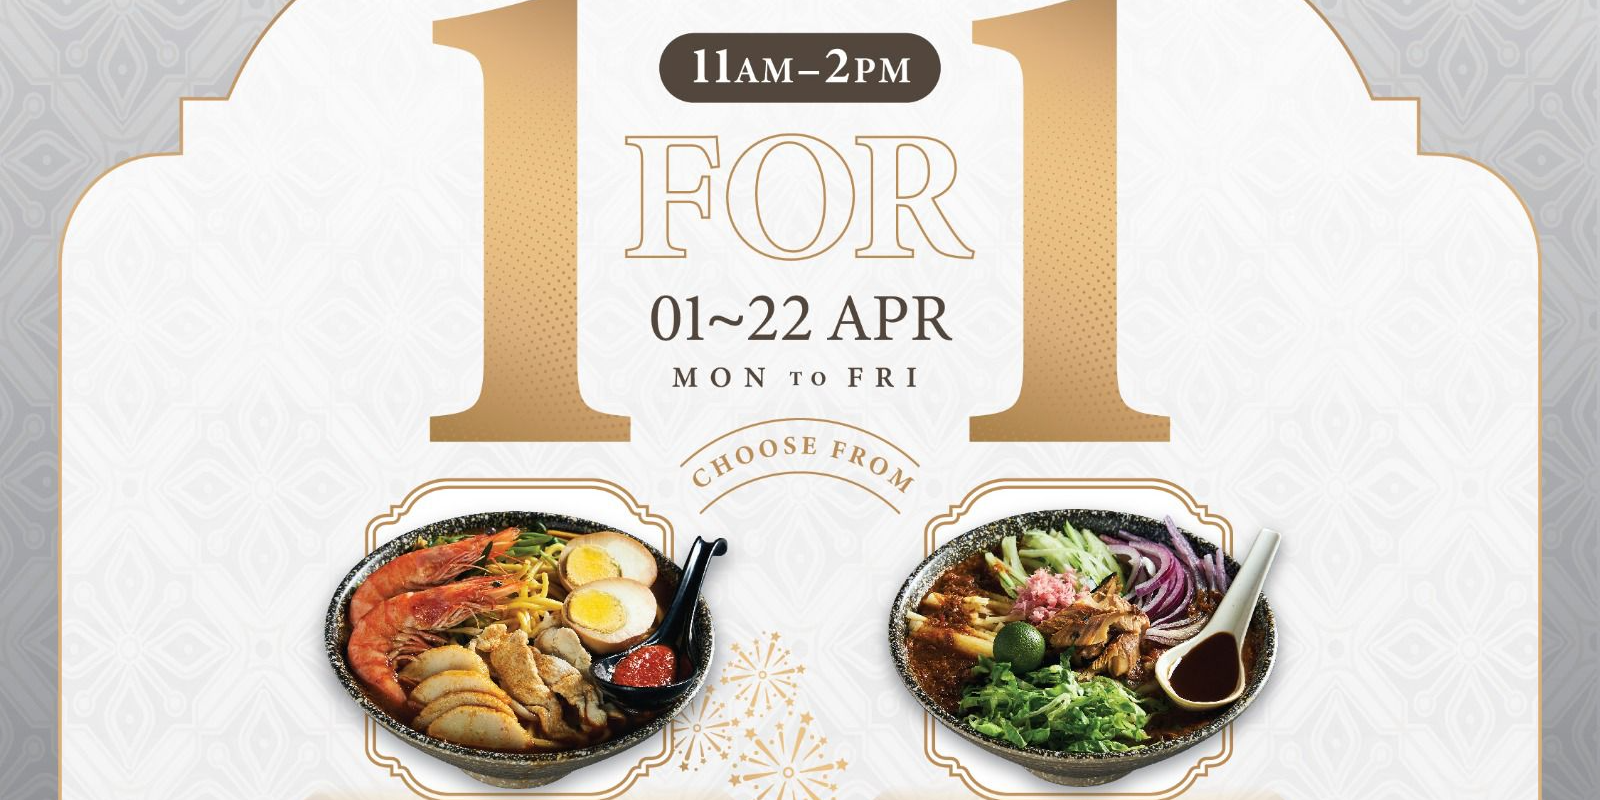 Enjoy 1-for-1 Mains and up to 40% off all ala carte items at Penang Culture in April